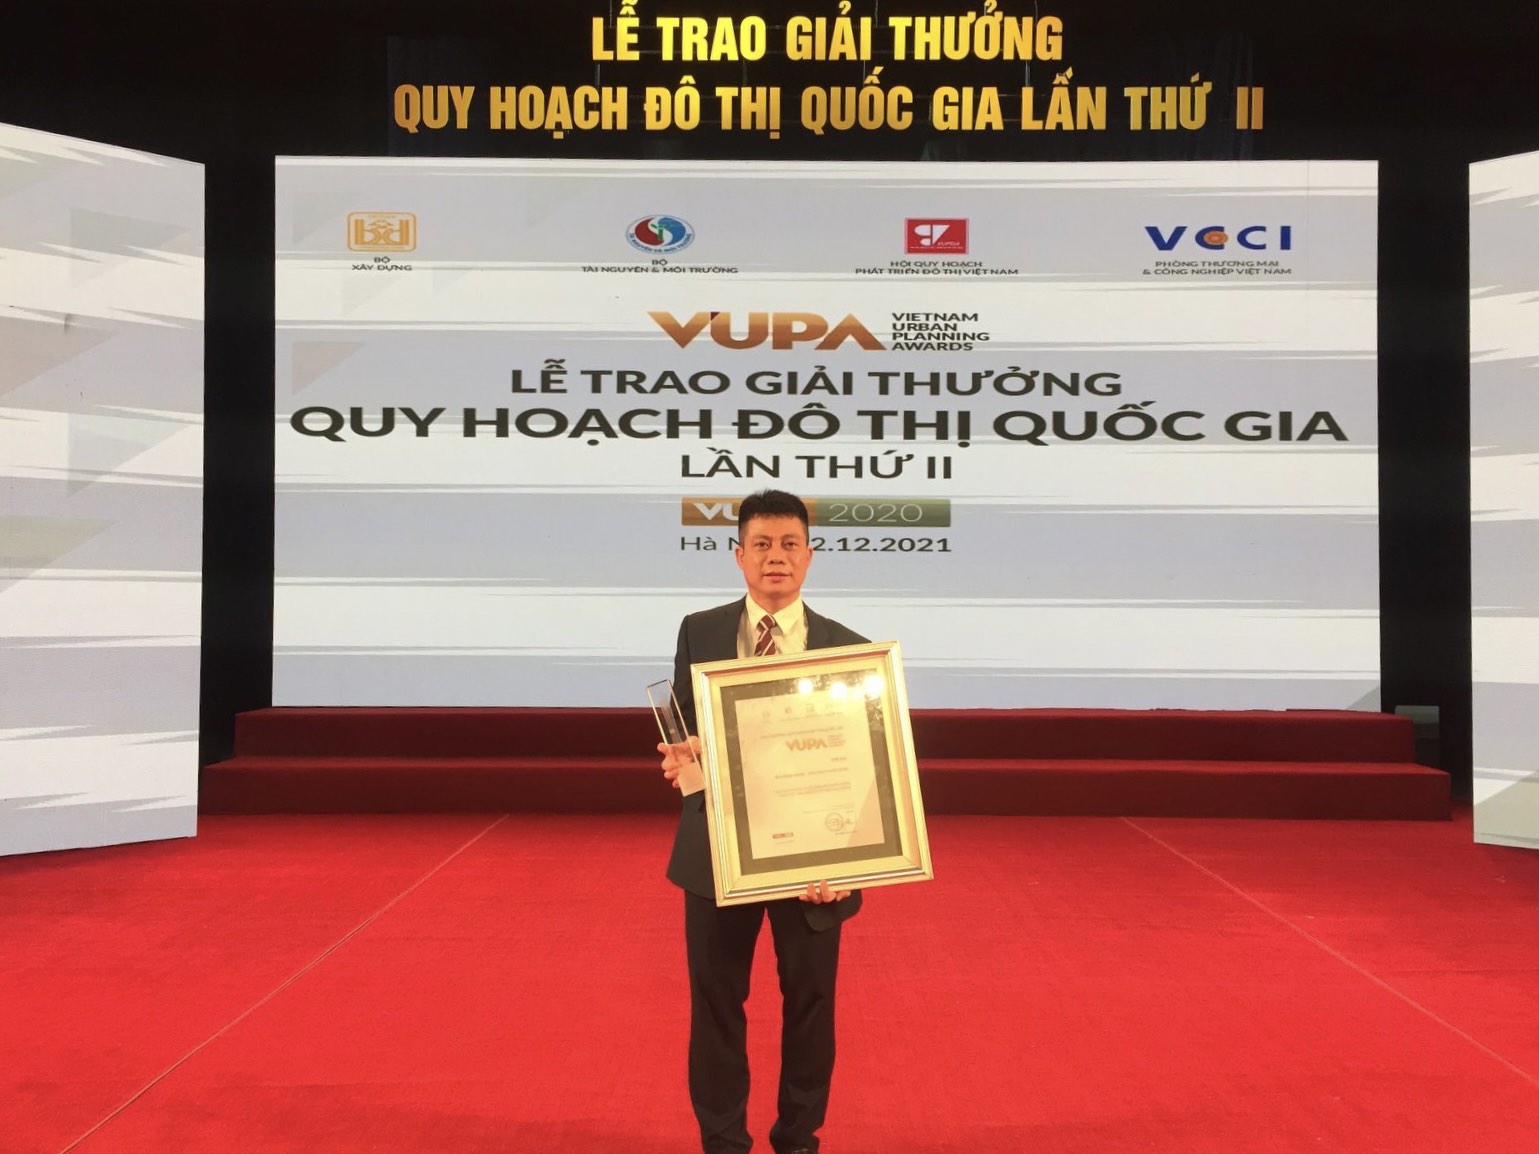 Phuoc Dong Wharf Bridge Industrial Park was awarded the Silver Award